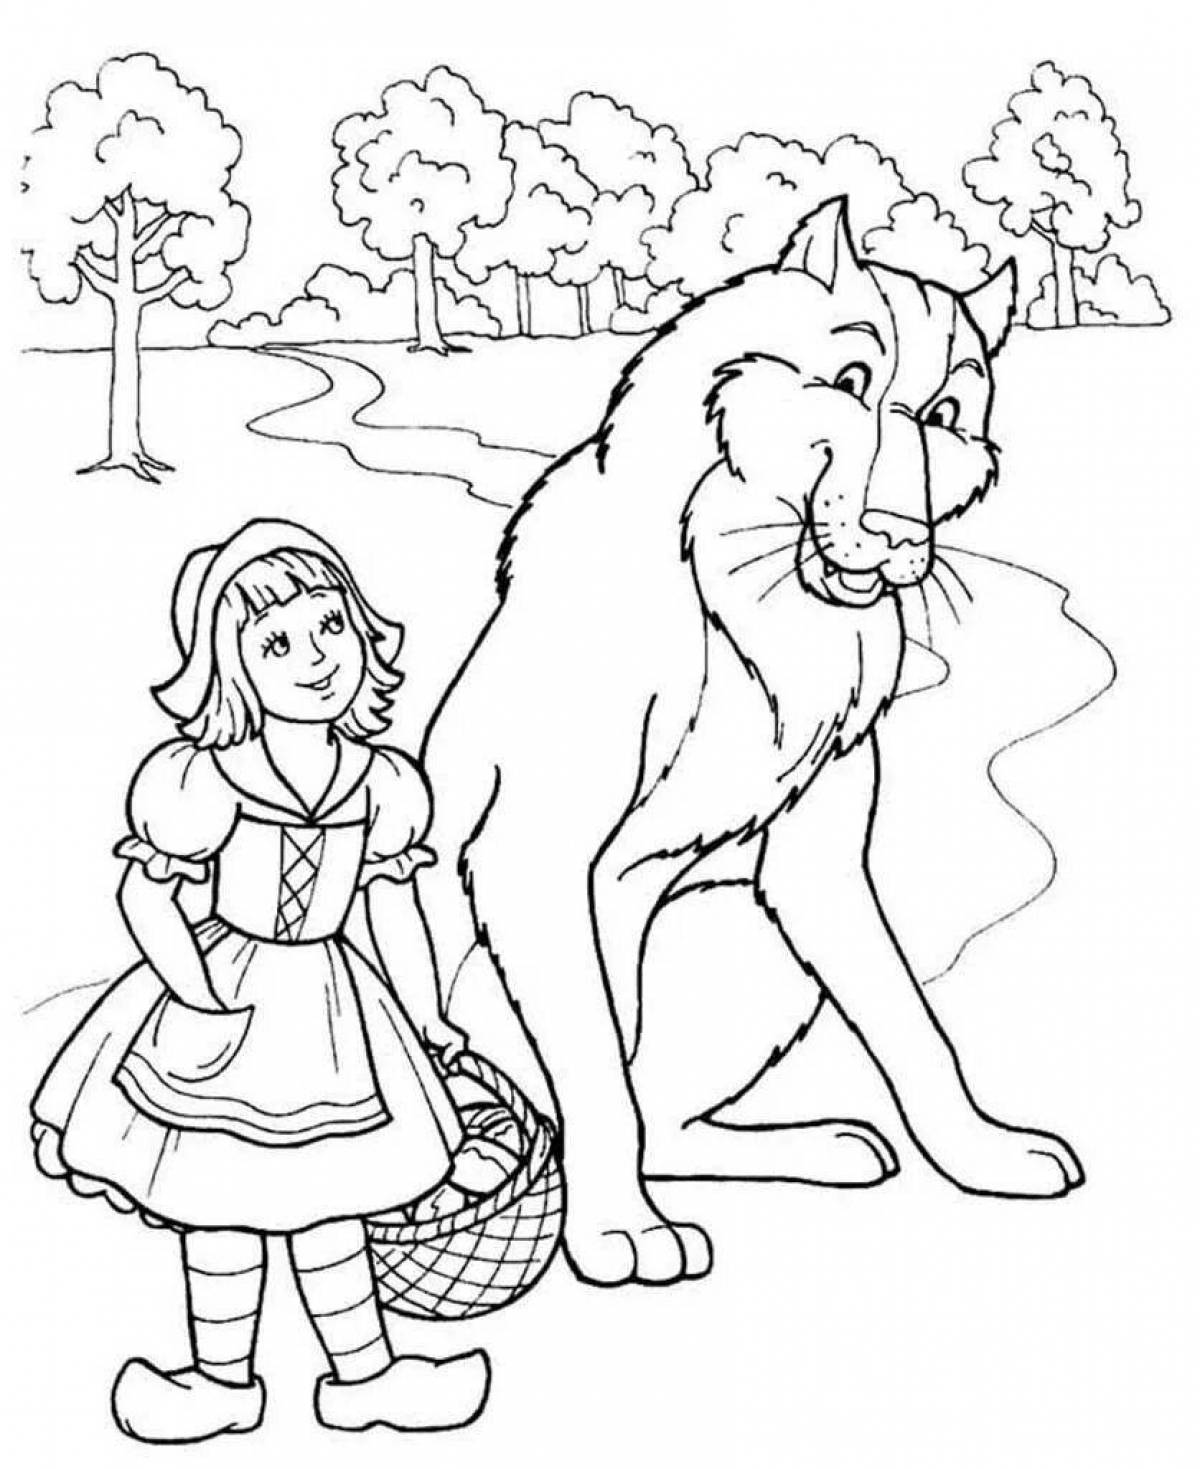 Coloring comic gray wolf and little red riding hood